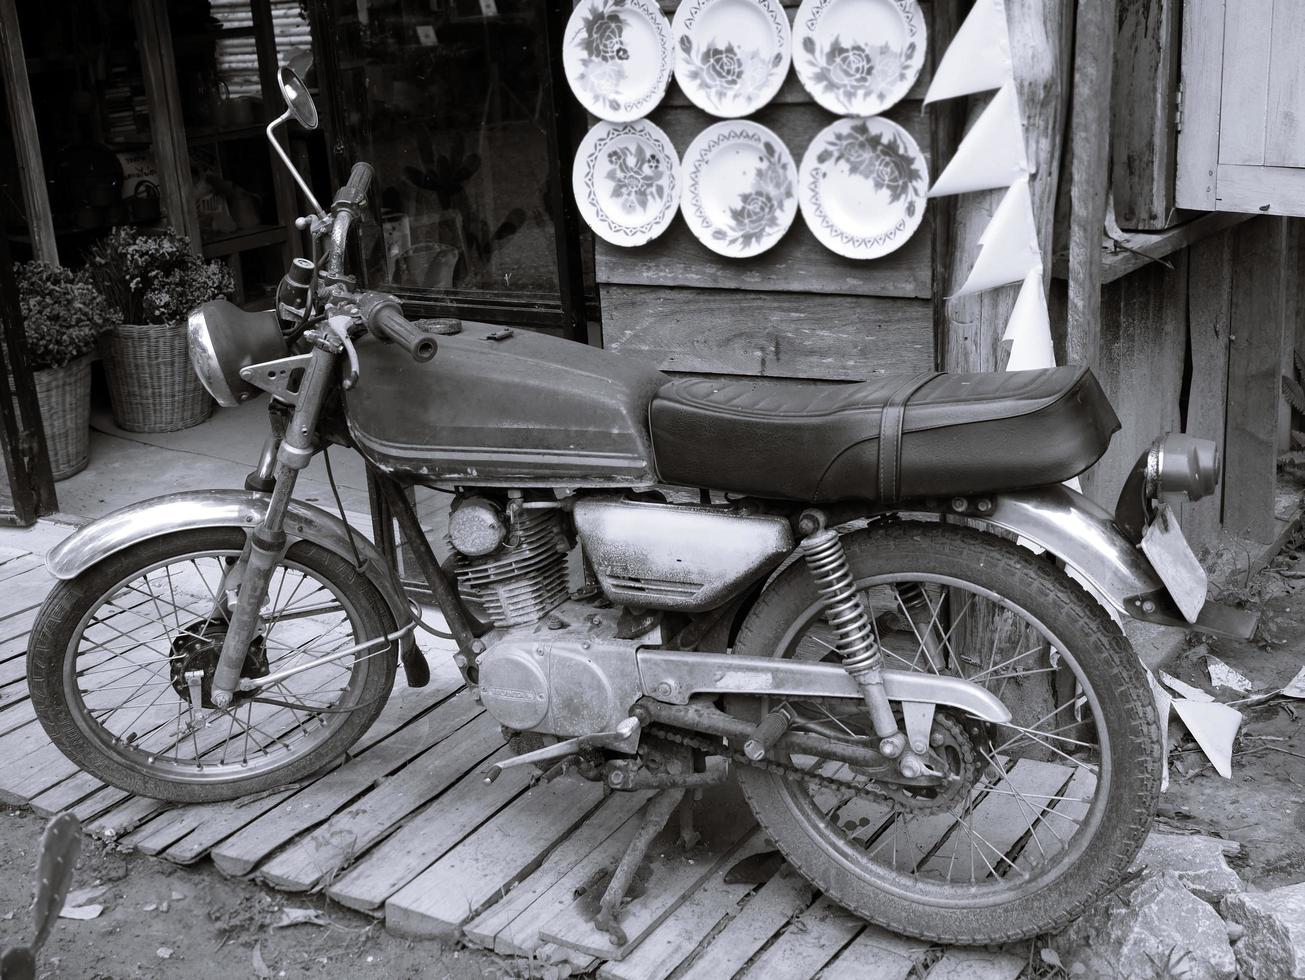 An old motorcycle parked in vintage style. photo